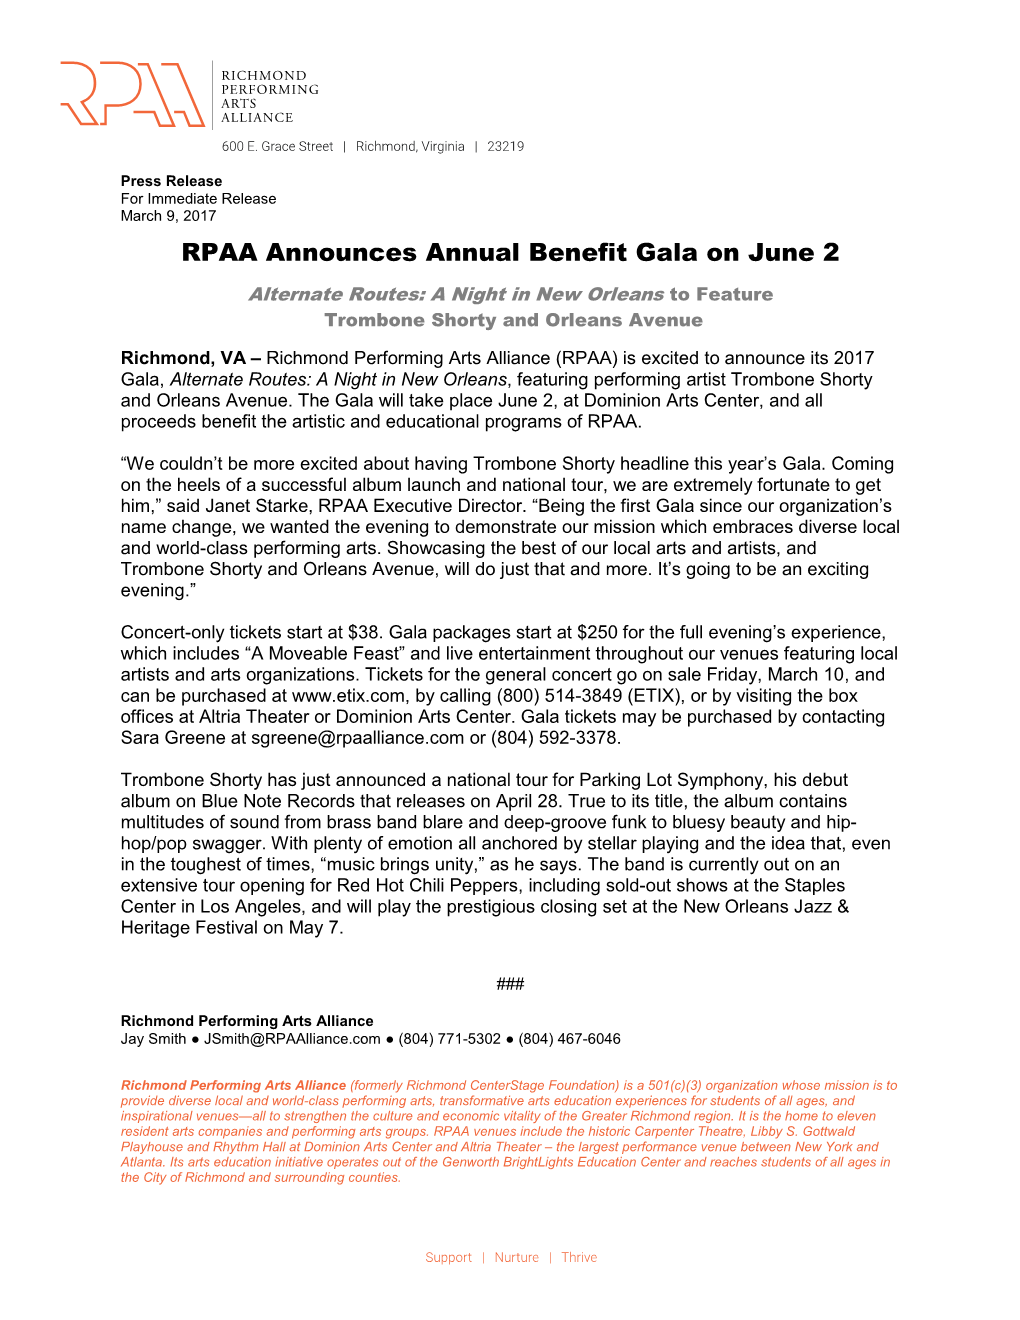 RPAA Announces Annual Benefit Gala on June 2